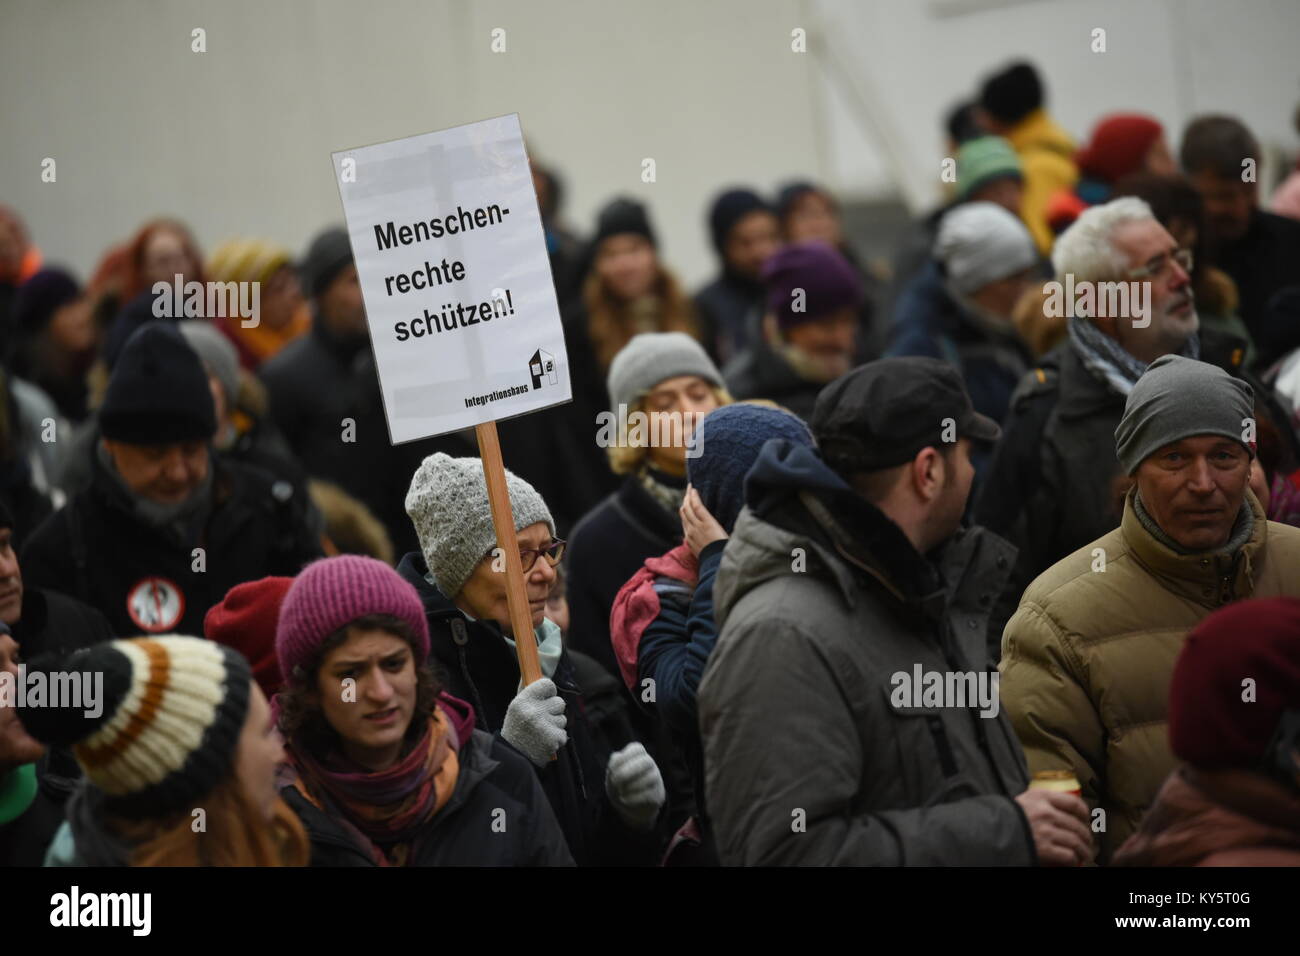 Vienna, Austria. 13th Jan, 2018. protester holding a sign demanding the protection of human rights during an anti-government demonstration. Credit: Vincent Sufiyan/Alamy Live News Stock Photo